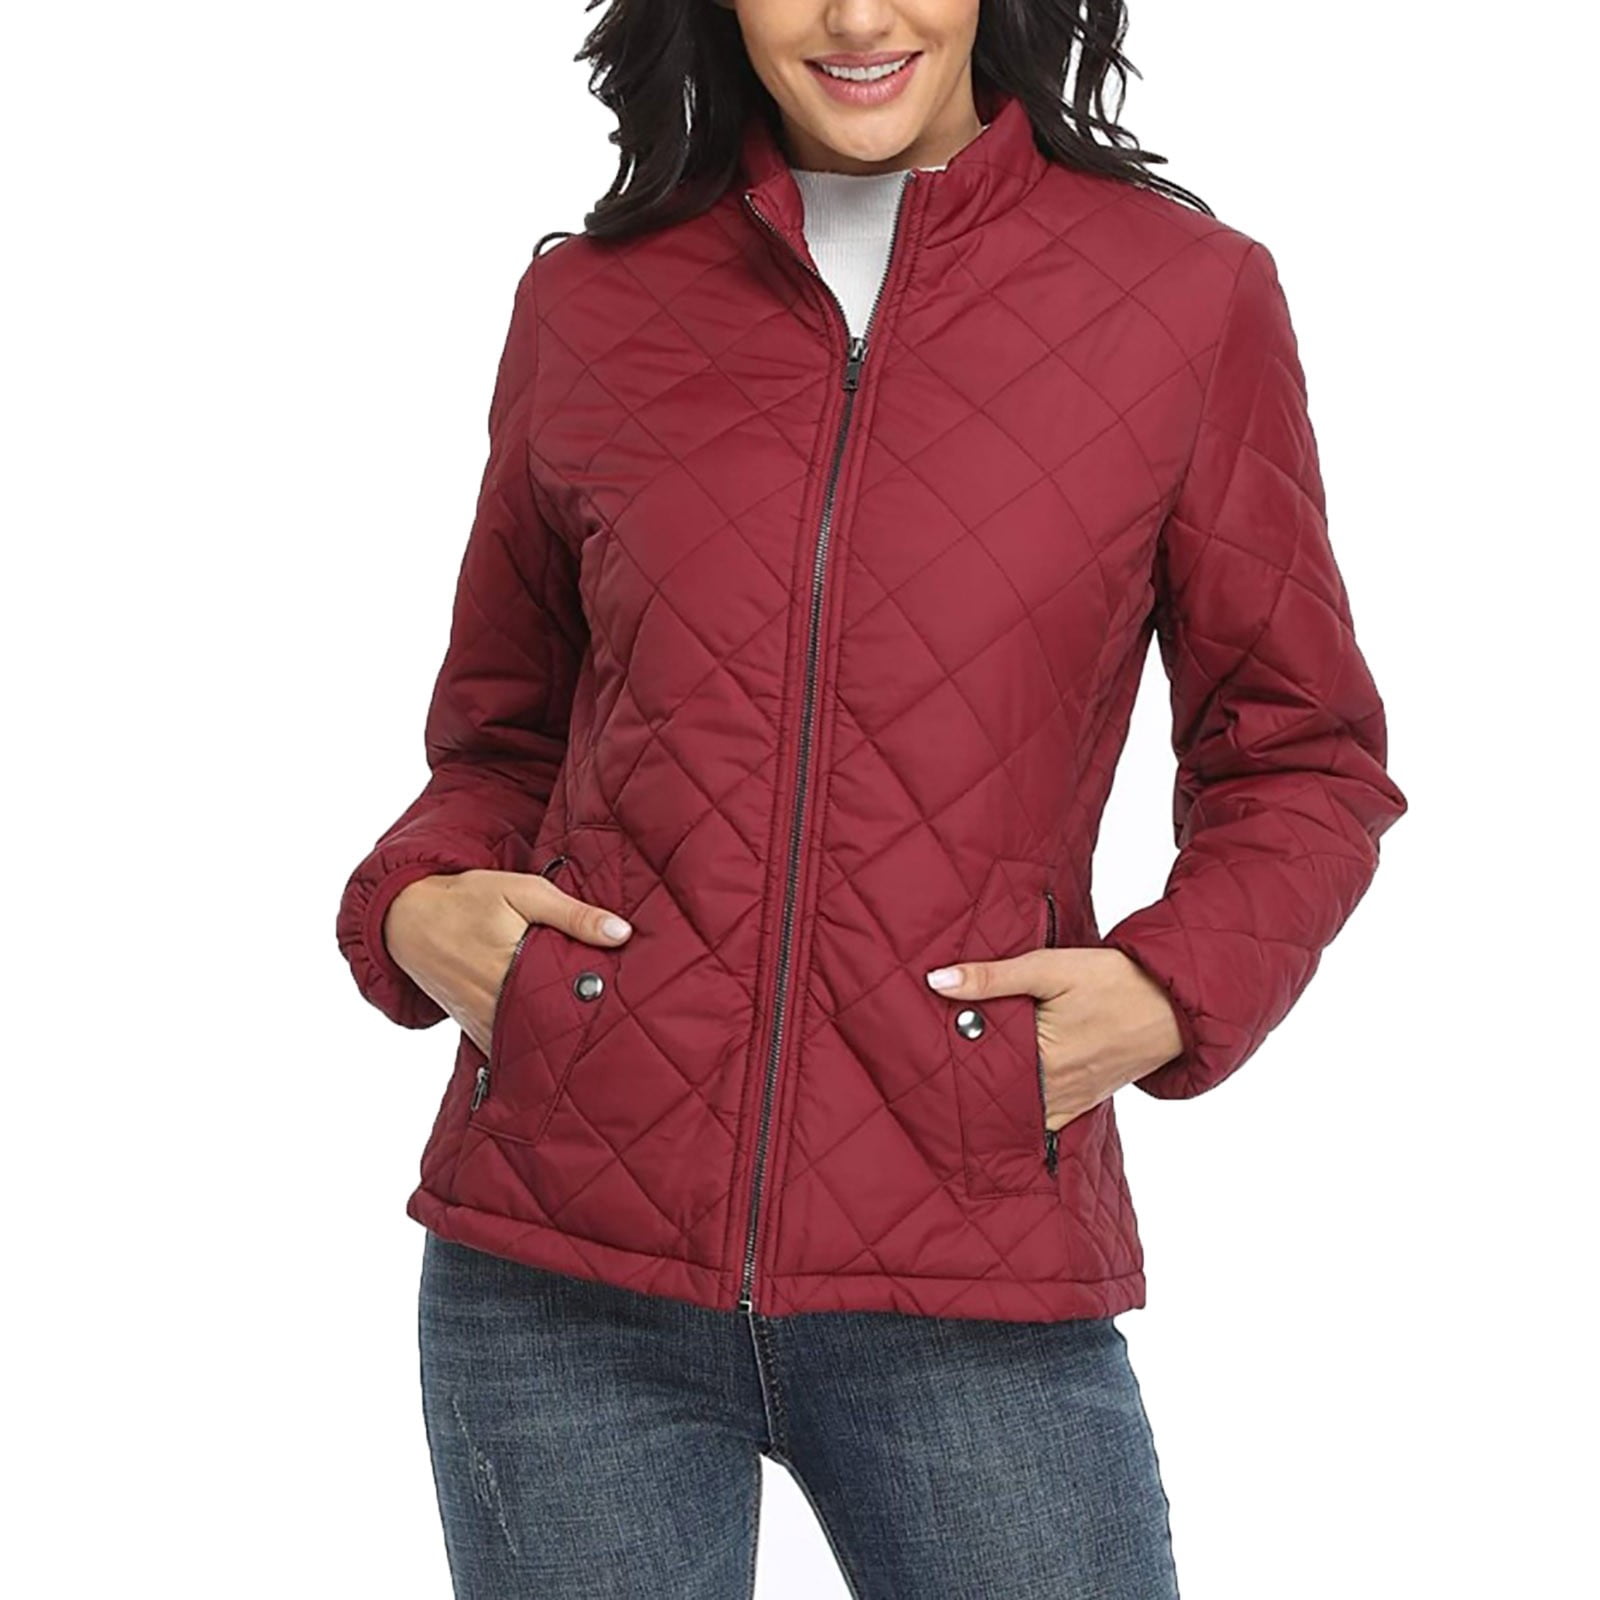 XIUH Women's Quilted Barn Jacket Plus Size Warm Autumn And Winter ...